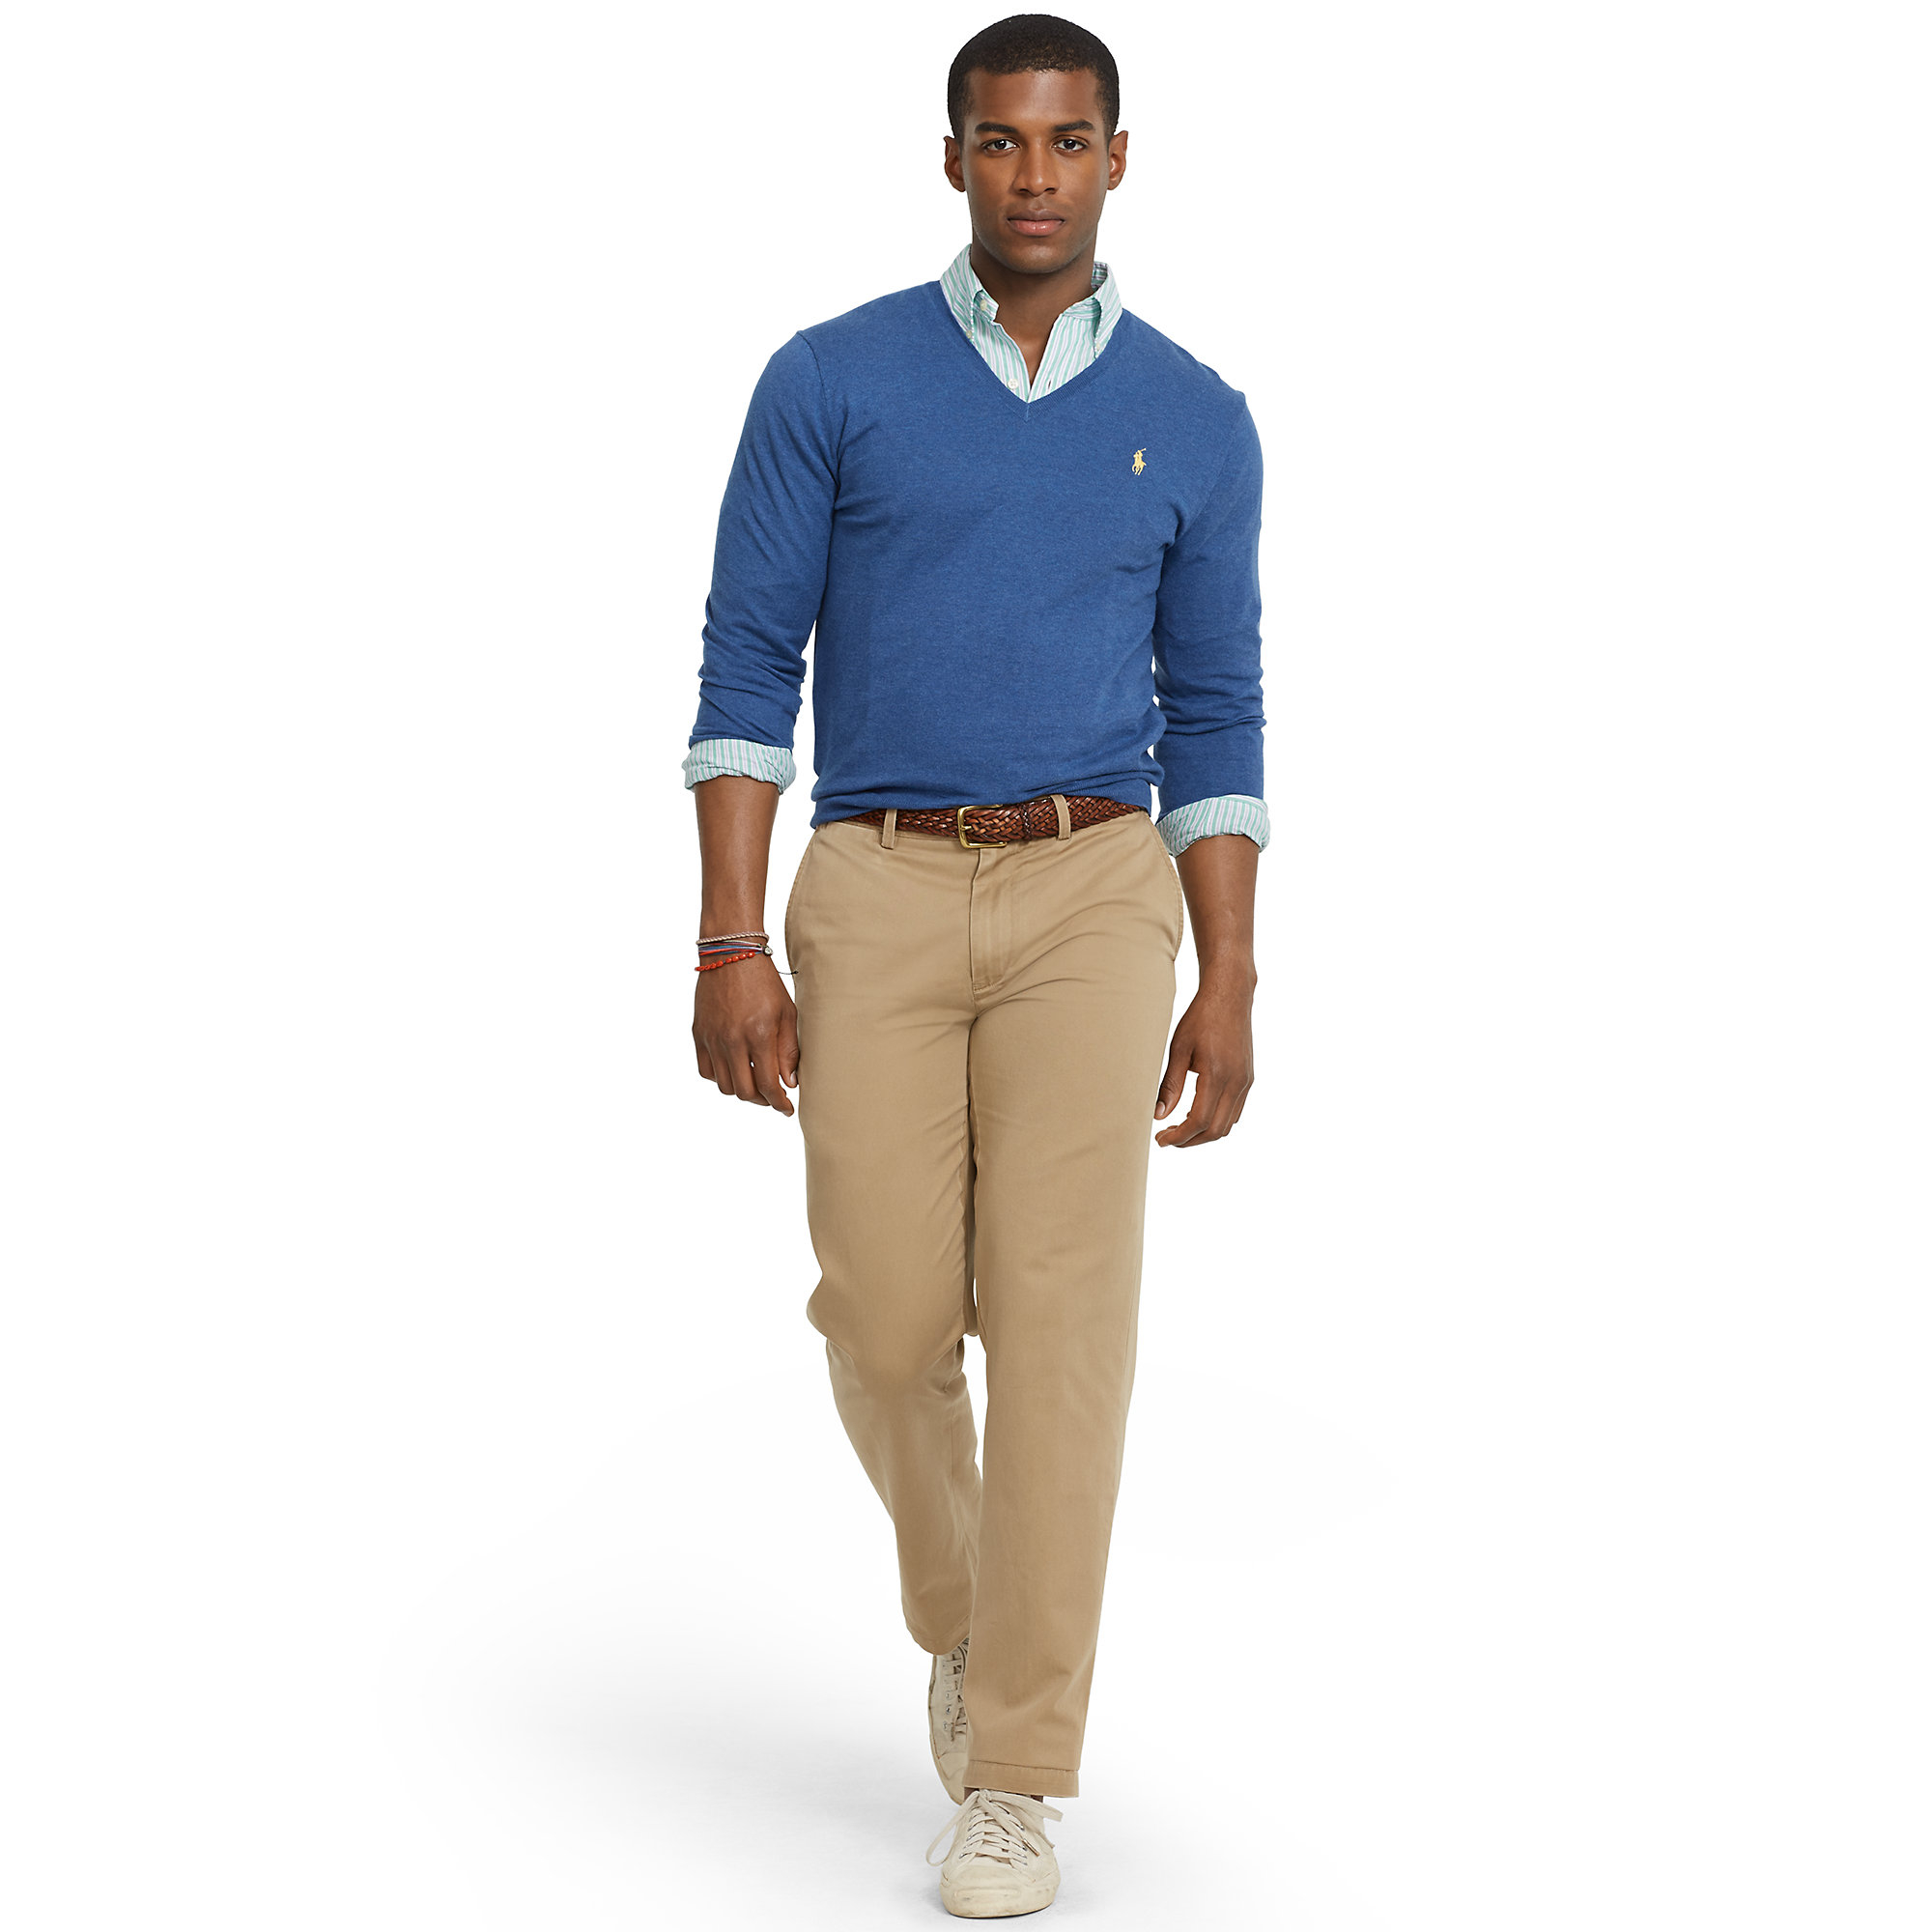 Lyst - Polo Ralph Lauren Classic-Fit Preppy Chino in Natural for Men